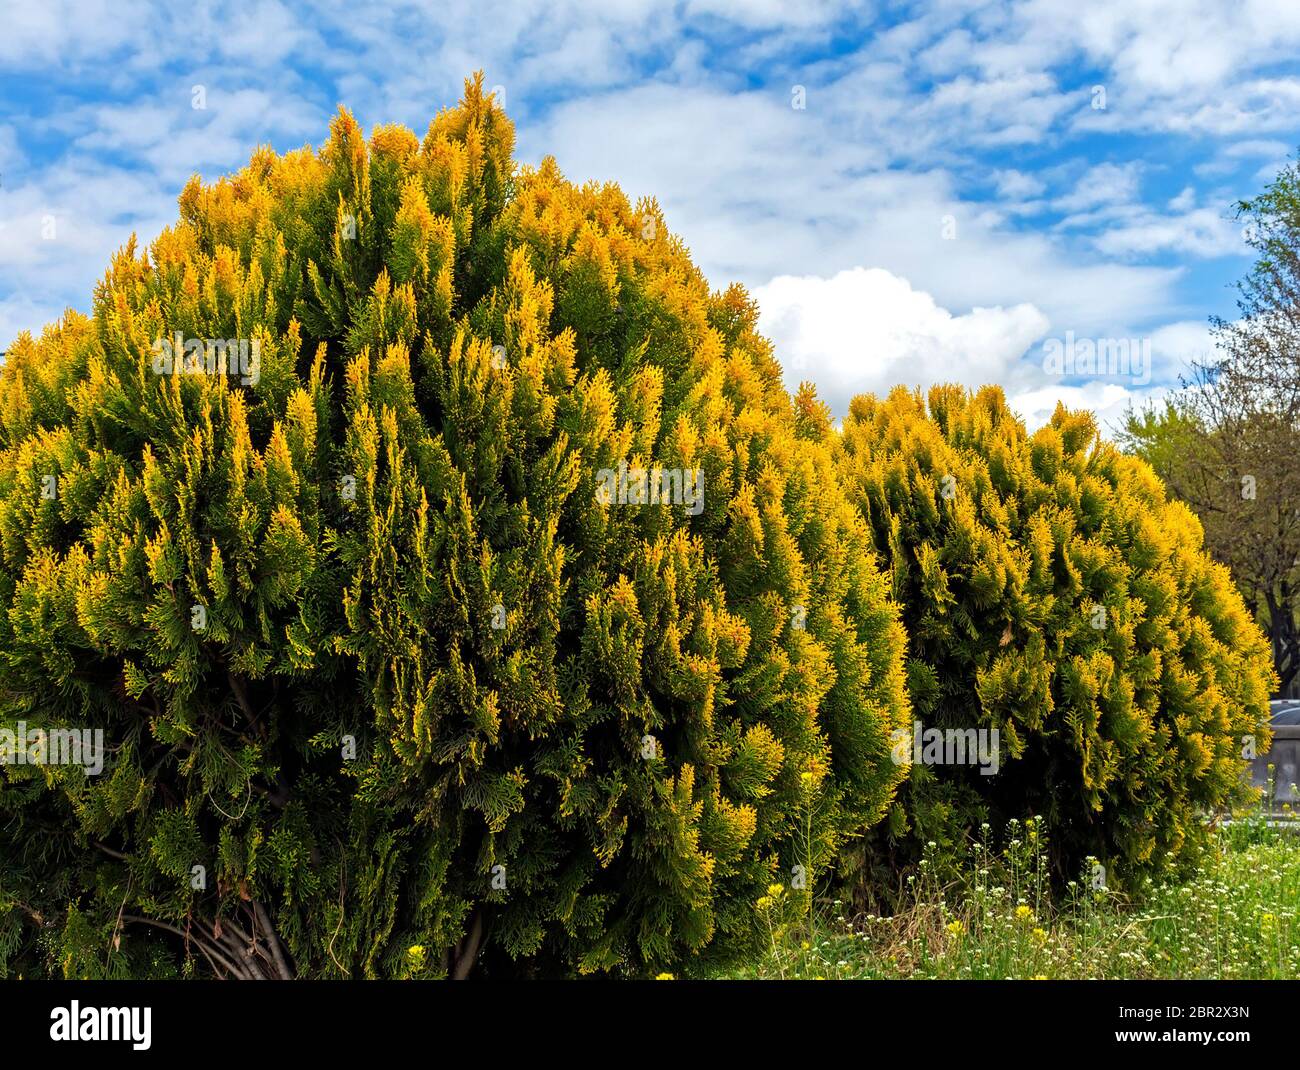 Thuja western 'Golden Globe' against the background of blue sky with clouds. Stock Photo